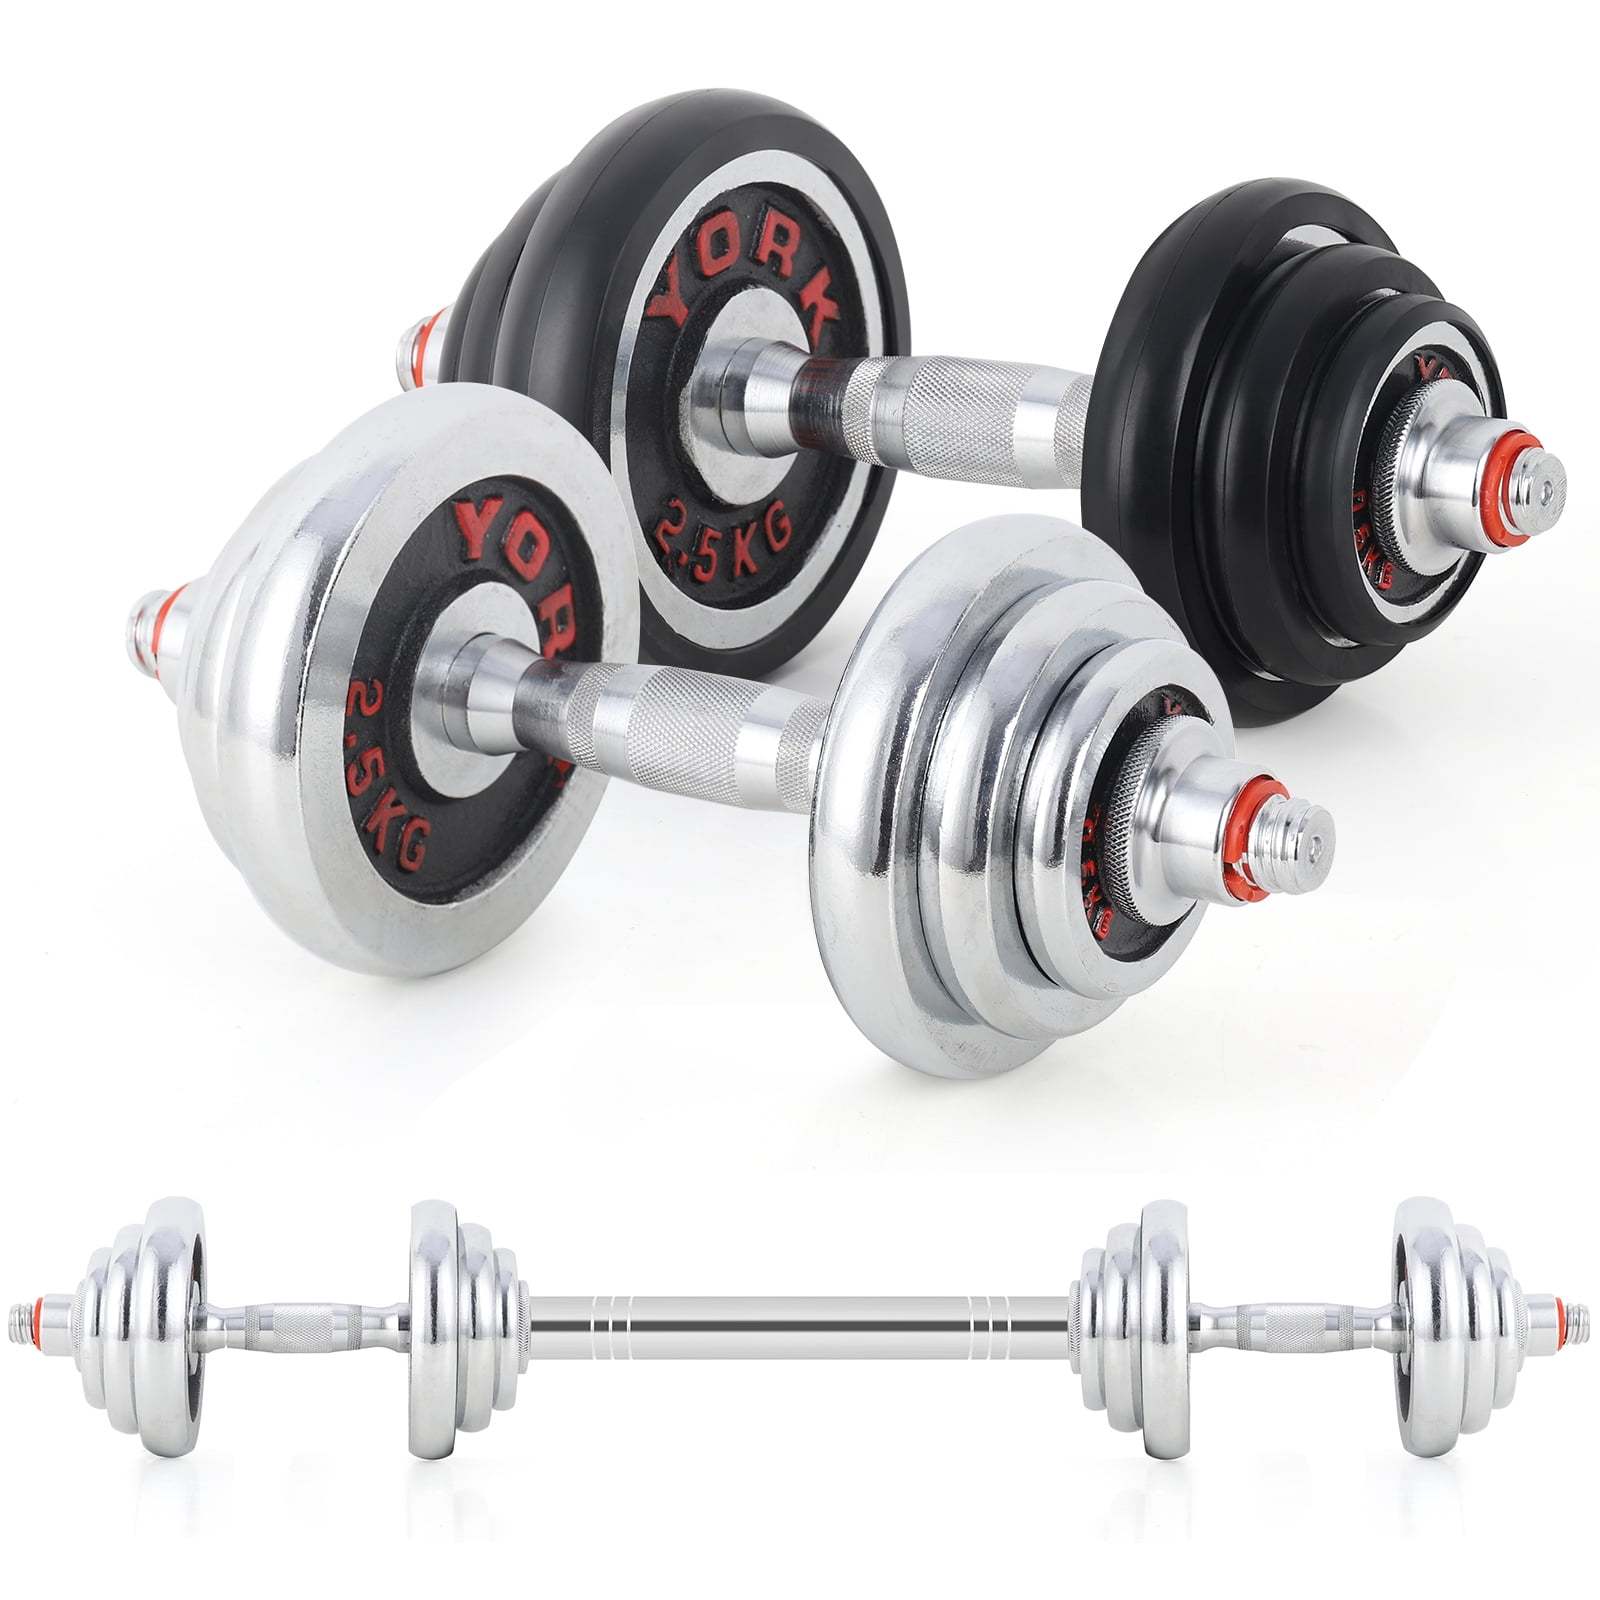 AJUMKER Dumbbells Barbell Set 22LBS 44LBS with Connecting Rod,Dumbbells Barbell Set,Adjustable Dumbbells Set,Adjustable Lifting Training Set for Men Women,Body Workout Home Gym Home Heavy Dumbbells 